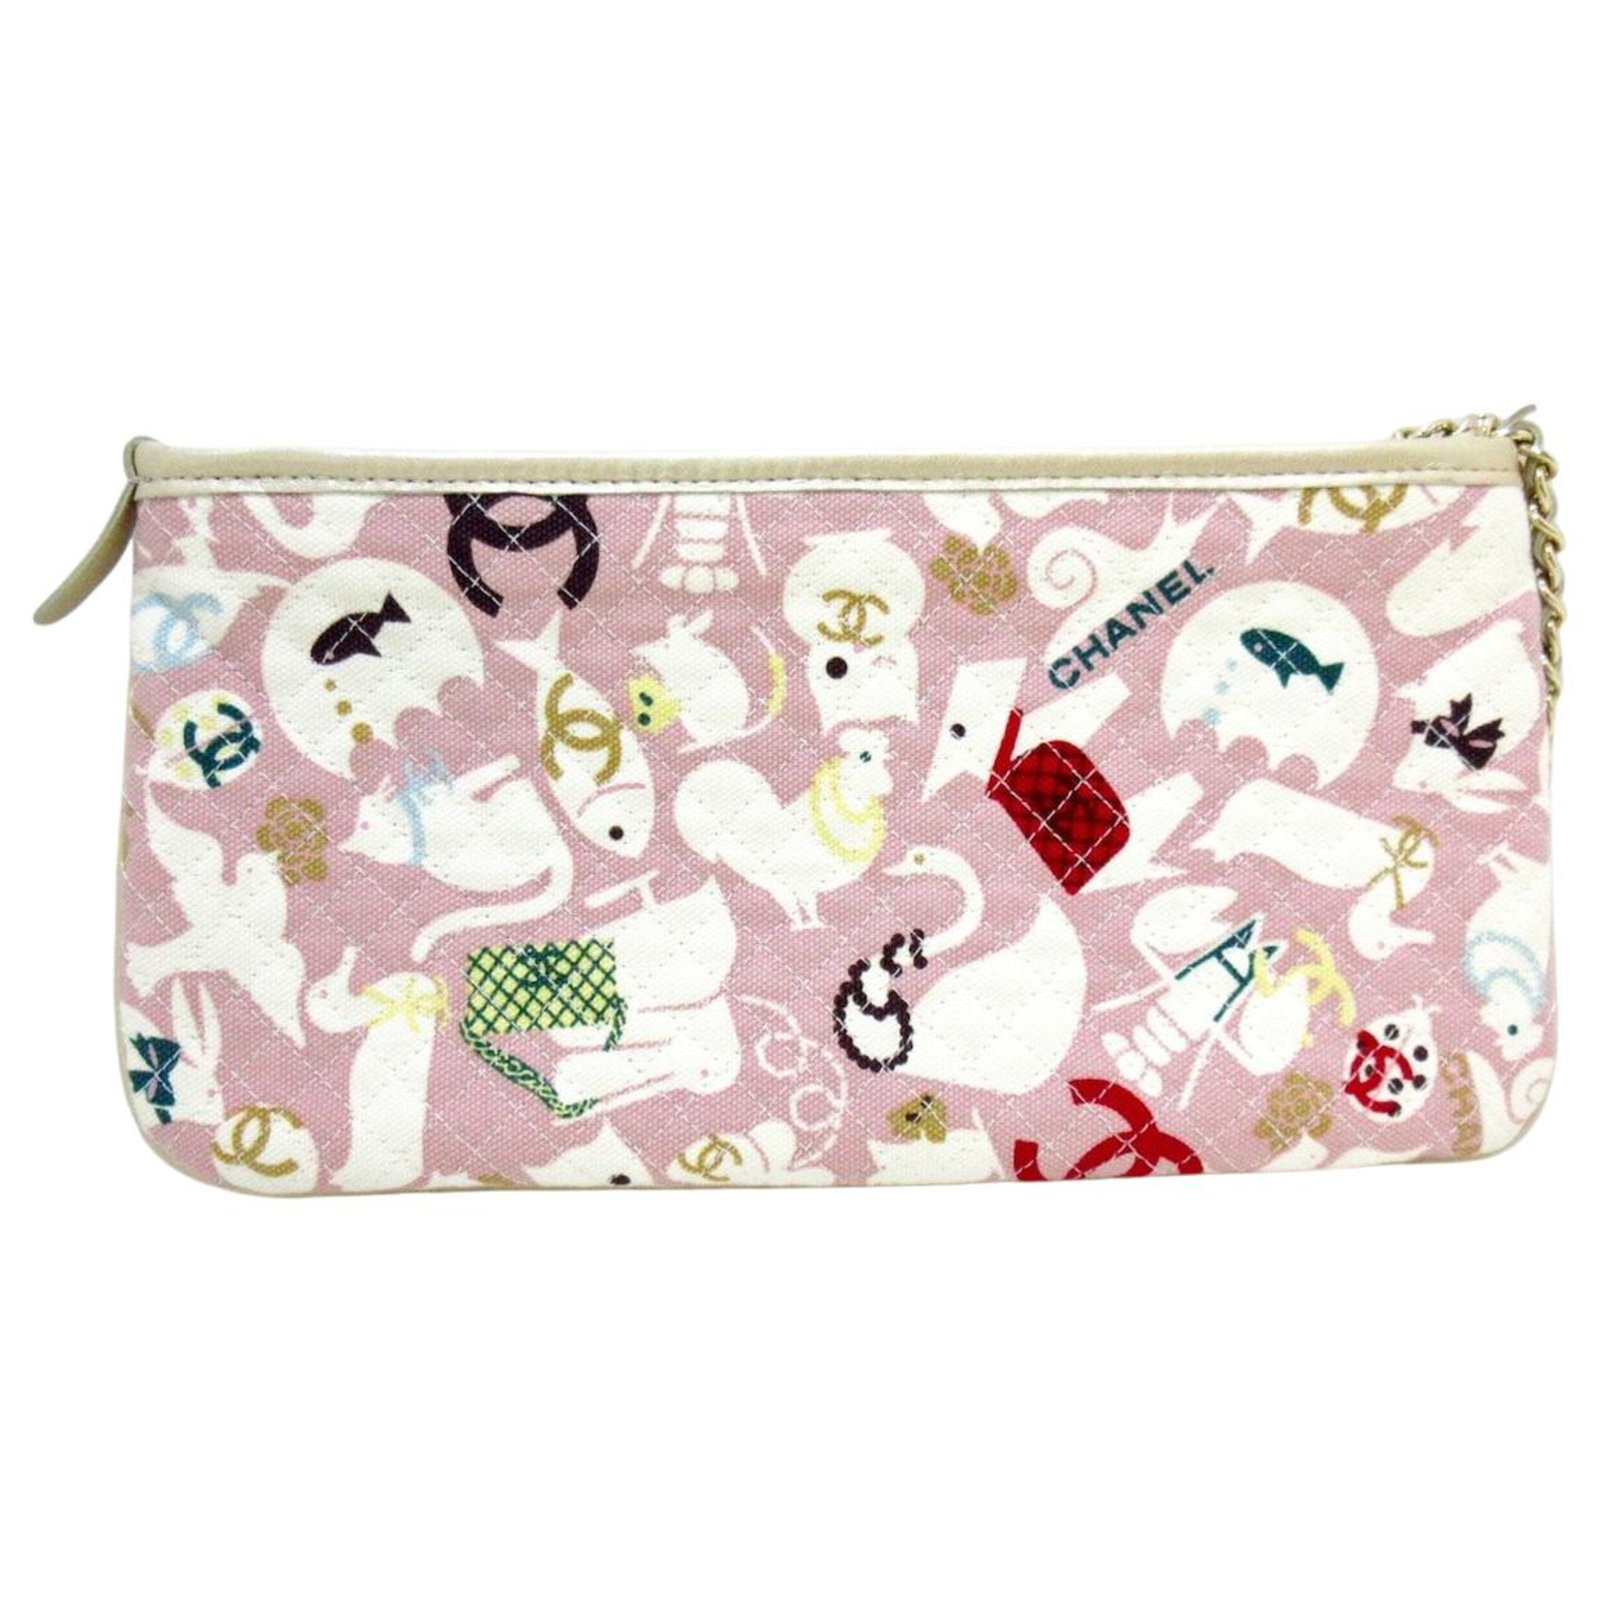 CHANEL Terry Cotton Baby Animals Diaper Bag Pink 43664